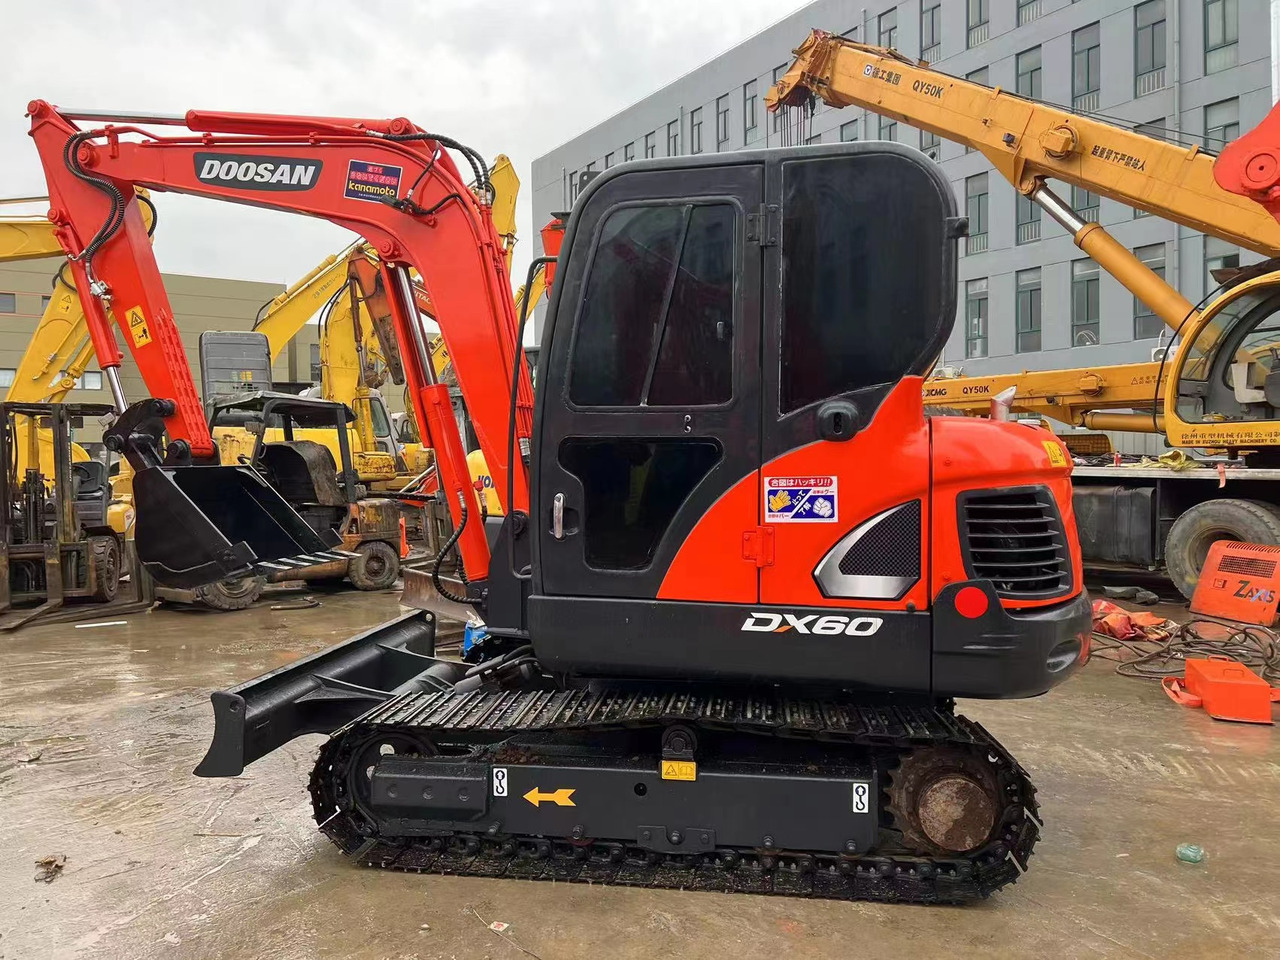 Pelle sur chenille High quality DOOSAN used excavator DX60 strong power hot selling !!!: photos 4